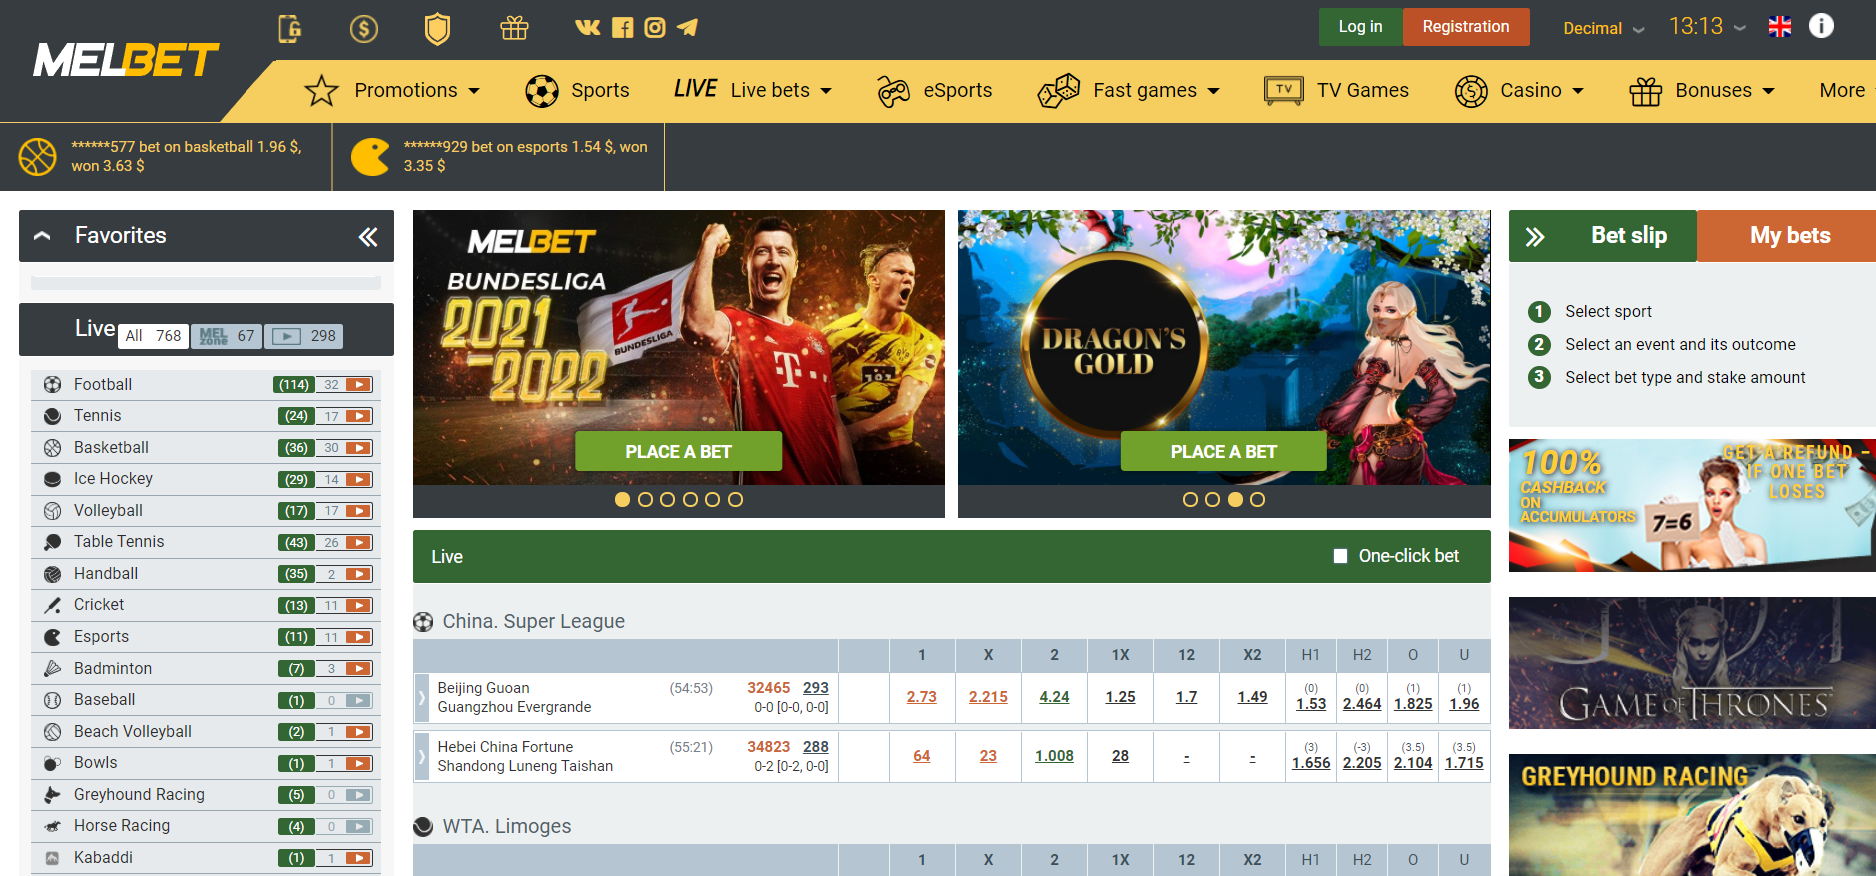 How to bet on the gaming platform Melbet?